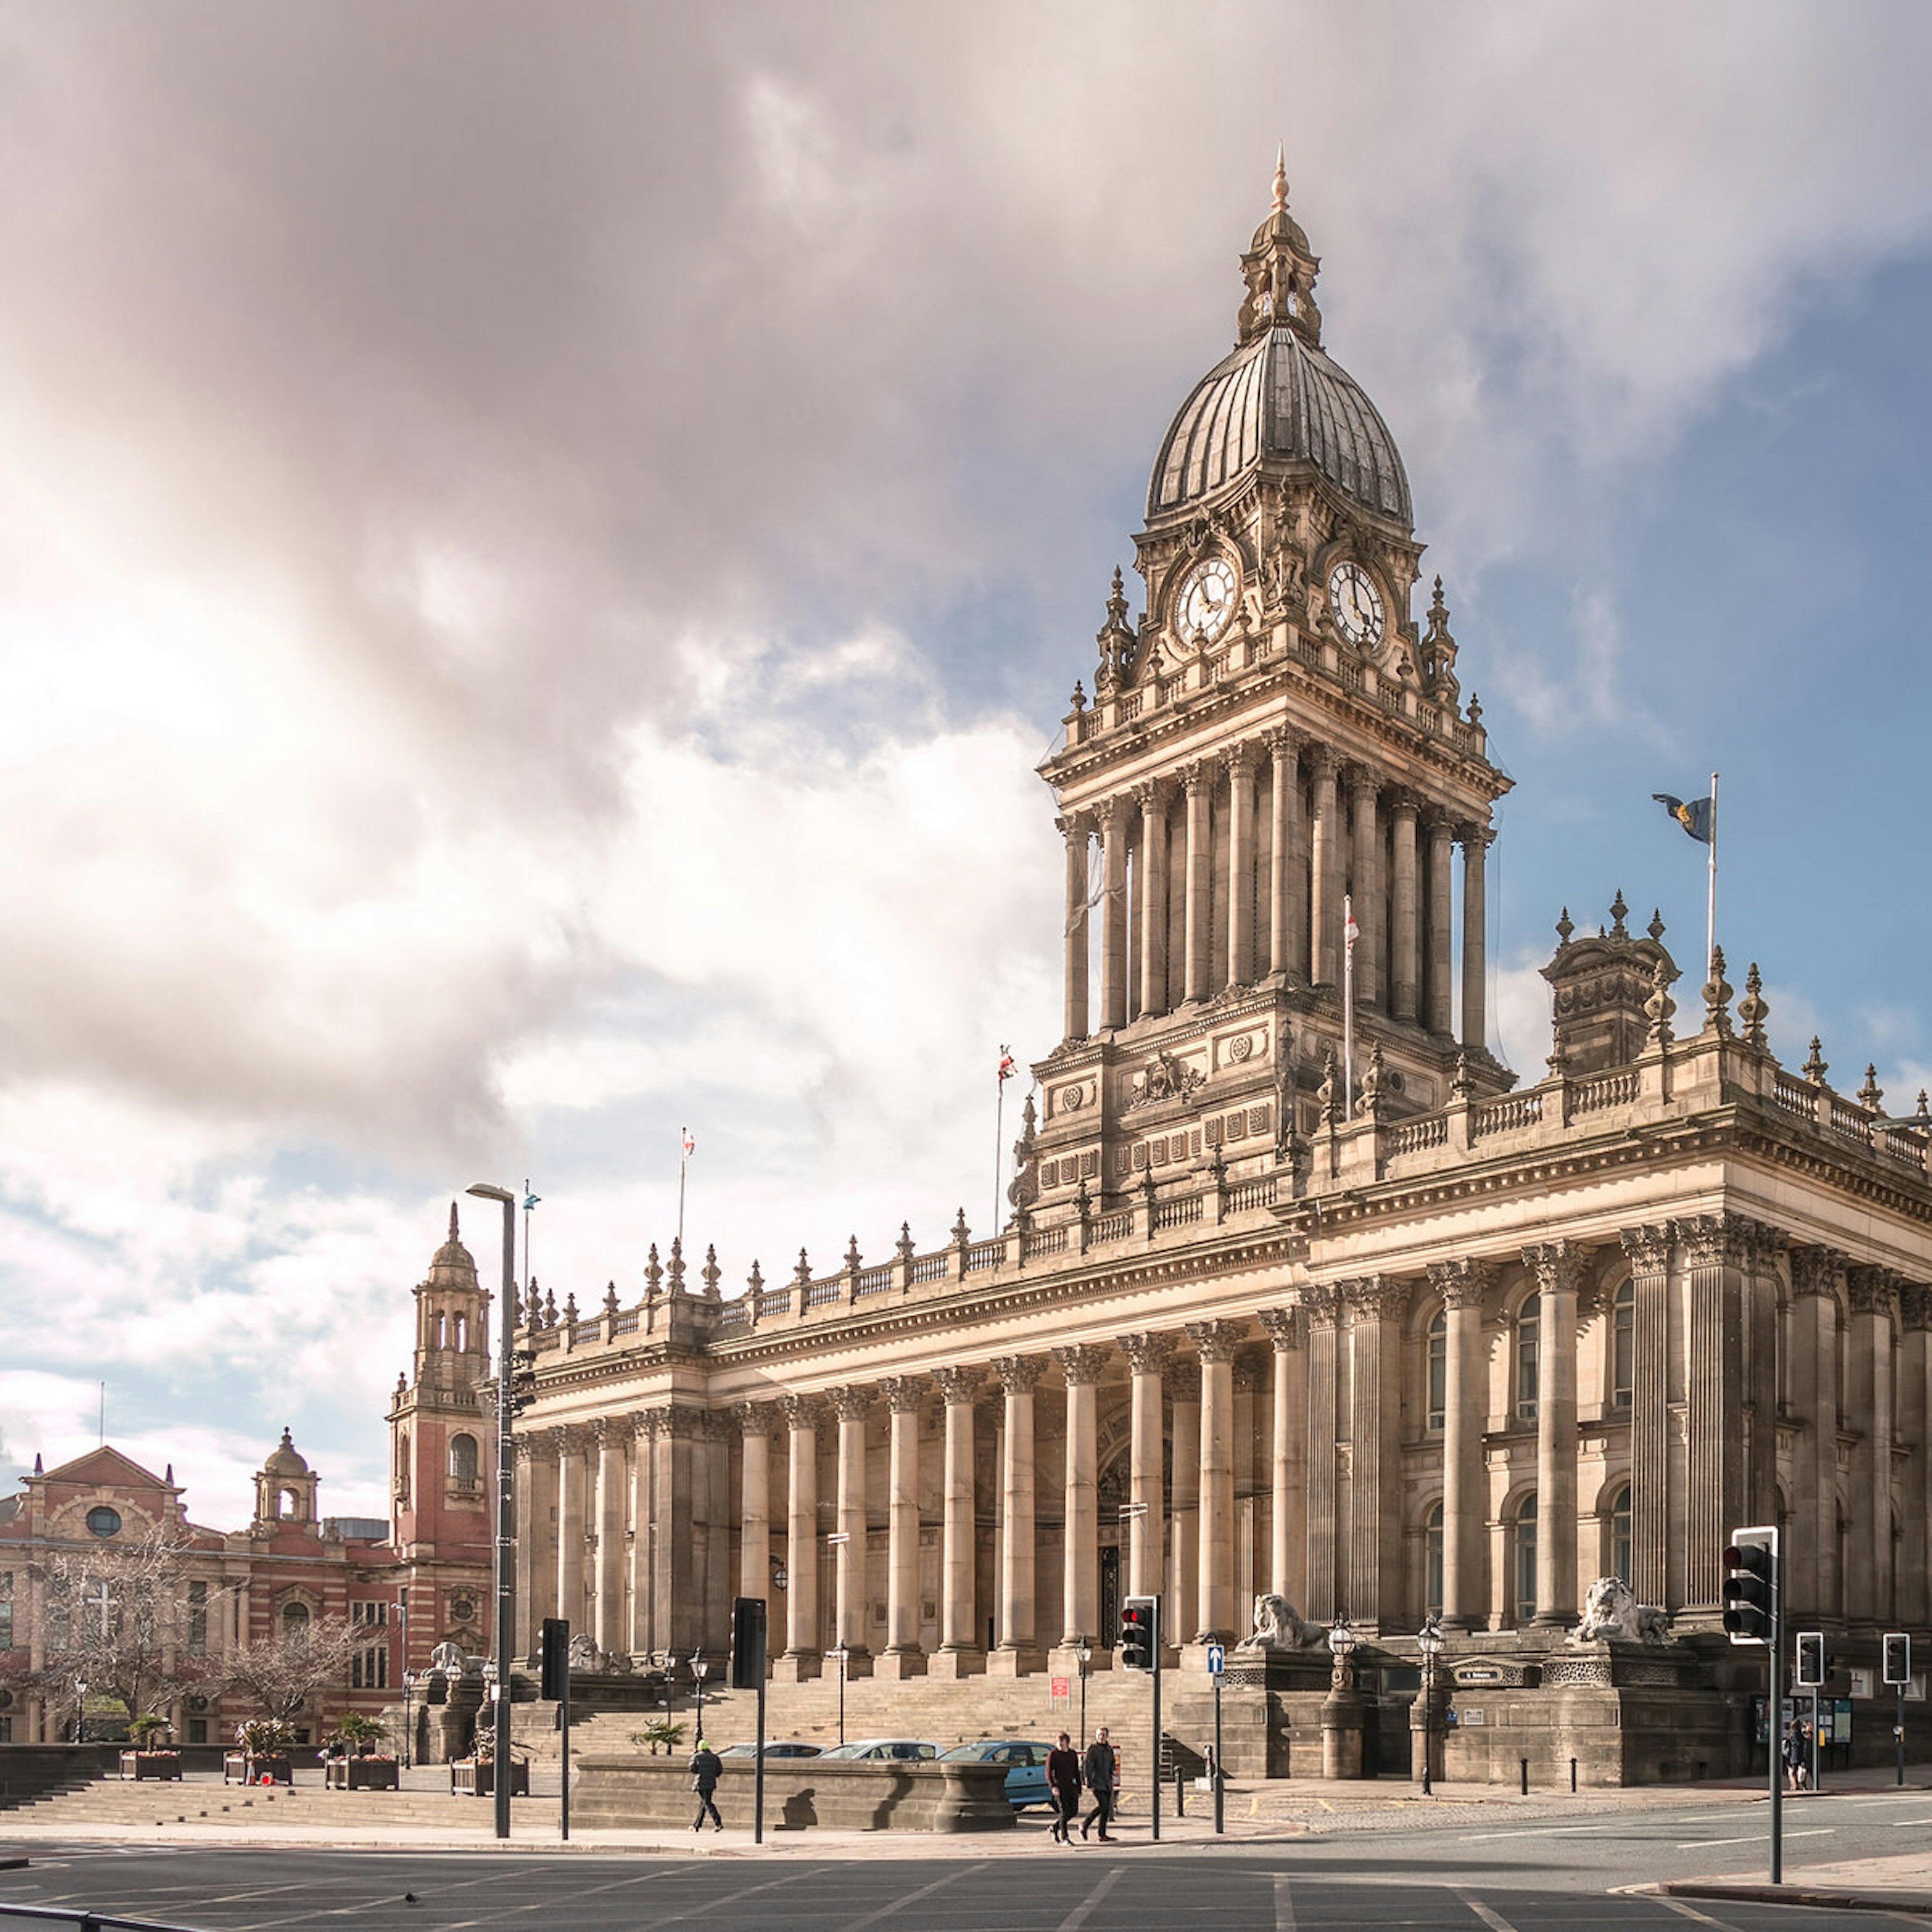 Leeds is a city with a proud history and a flourishing cultural scene © PoohFotoz / Shutterstock